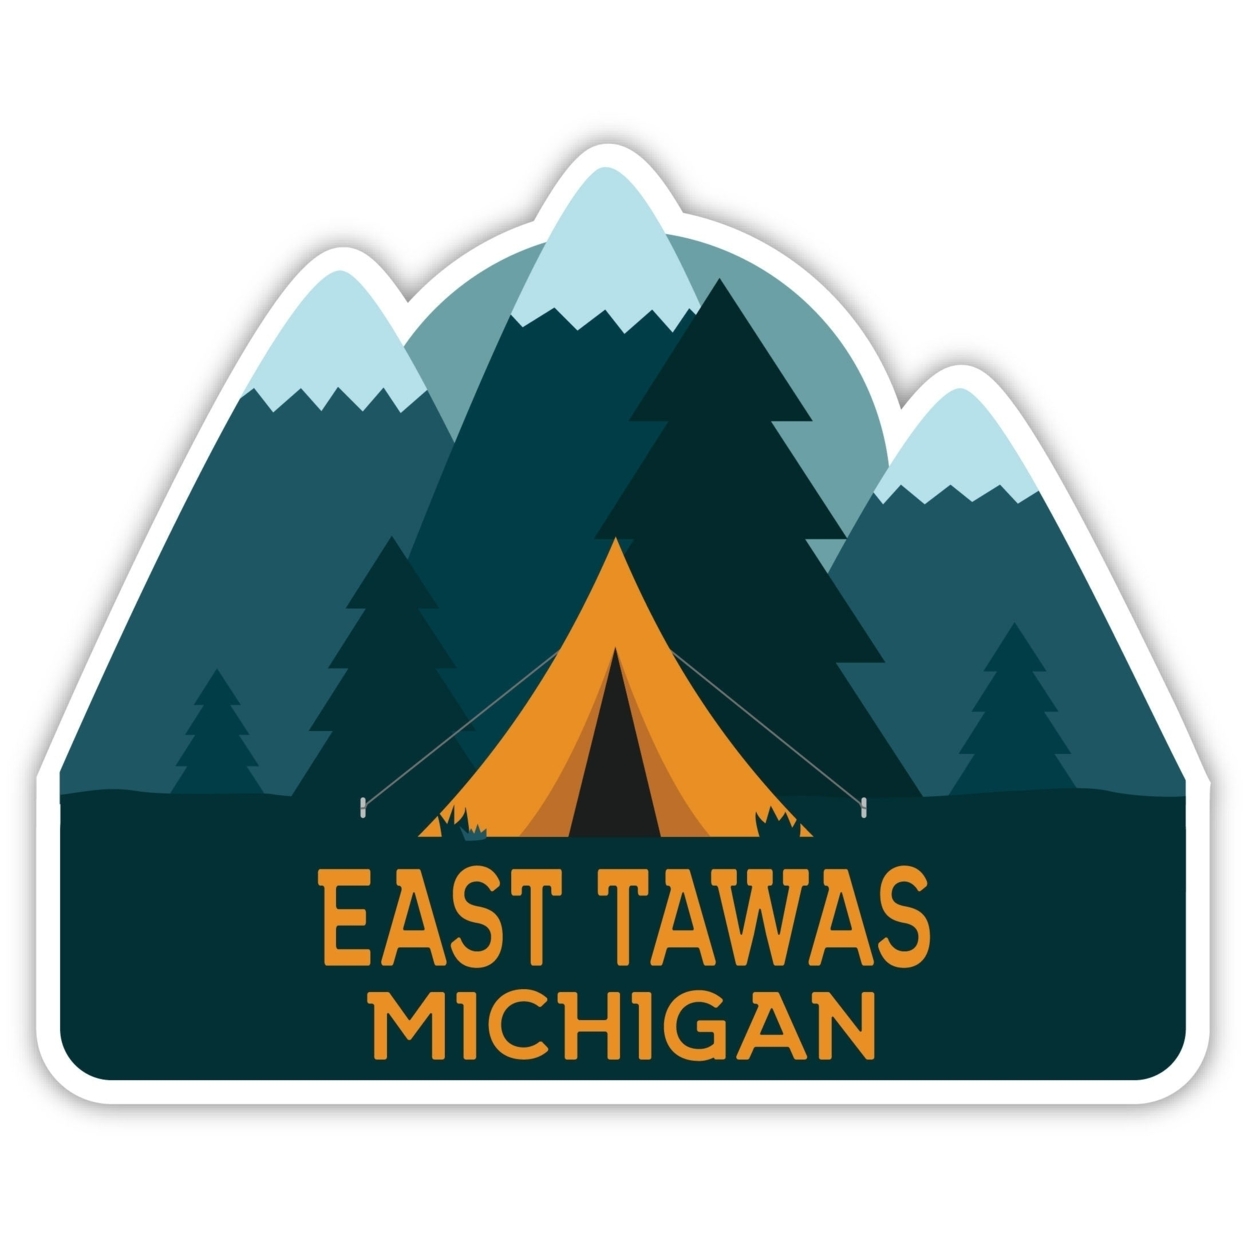 East Tawas Michigan Souvenir Decorative Stickers (Choose Theme And Size) - 4-Pack, 6-Inch, Tent